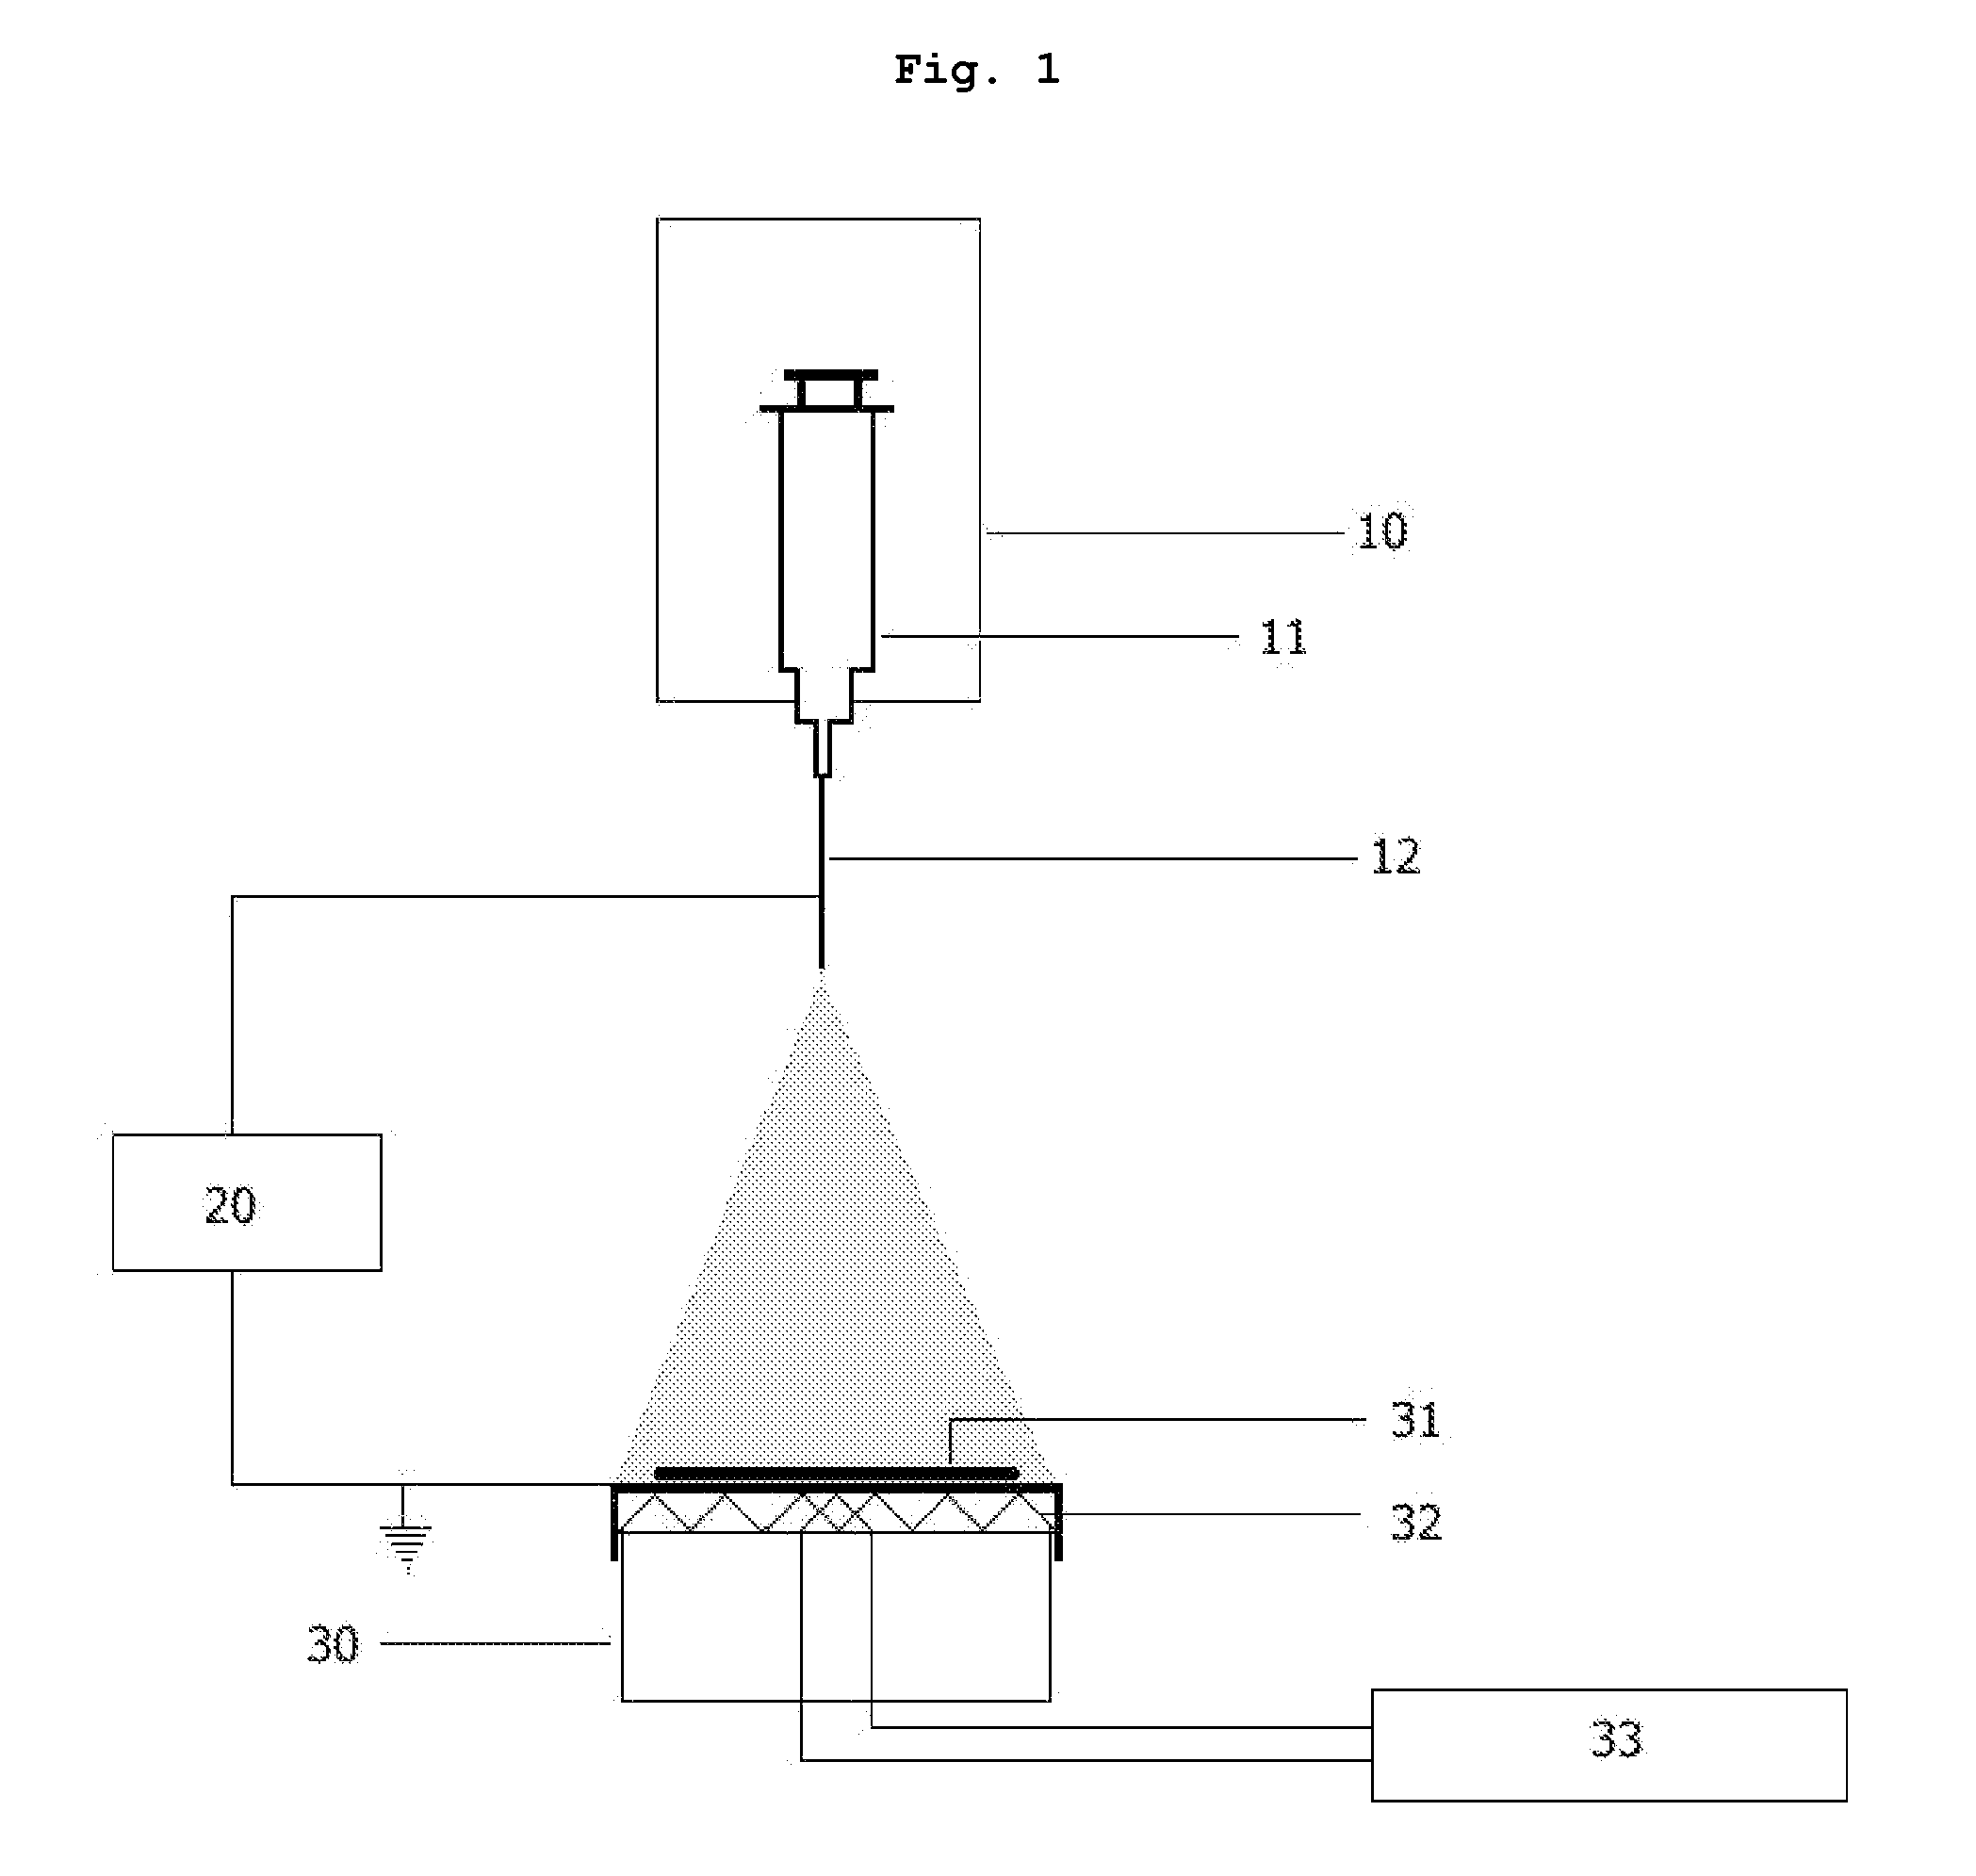 METHOD FOR PREPARING Pt THIN FILMS USING ELECTROSPRAY DEPOSITION AND Pt THIN FILMS FORMED BY THE METHOD